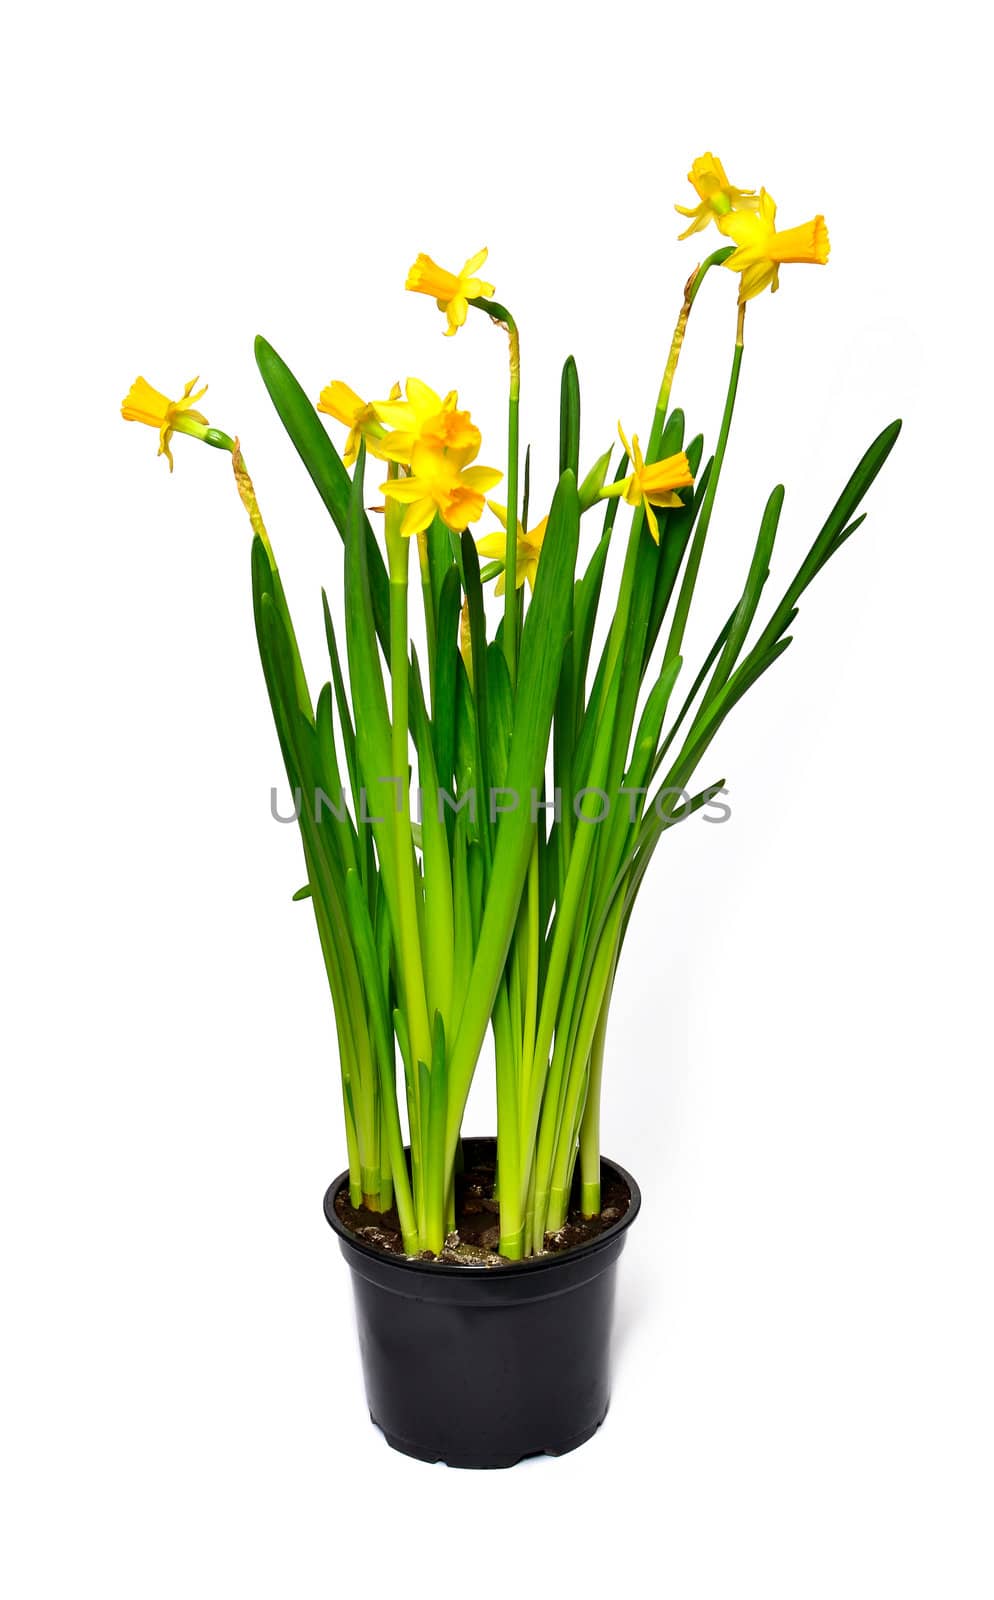 Pot of Narcissus on a white background by DNKSTUDIO